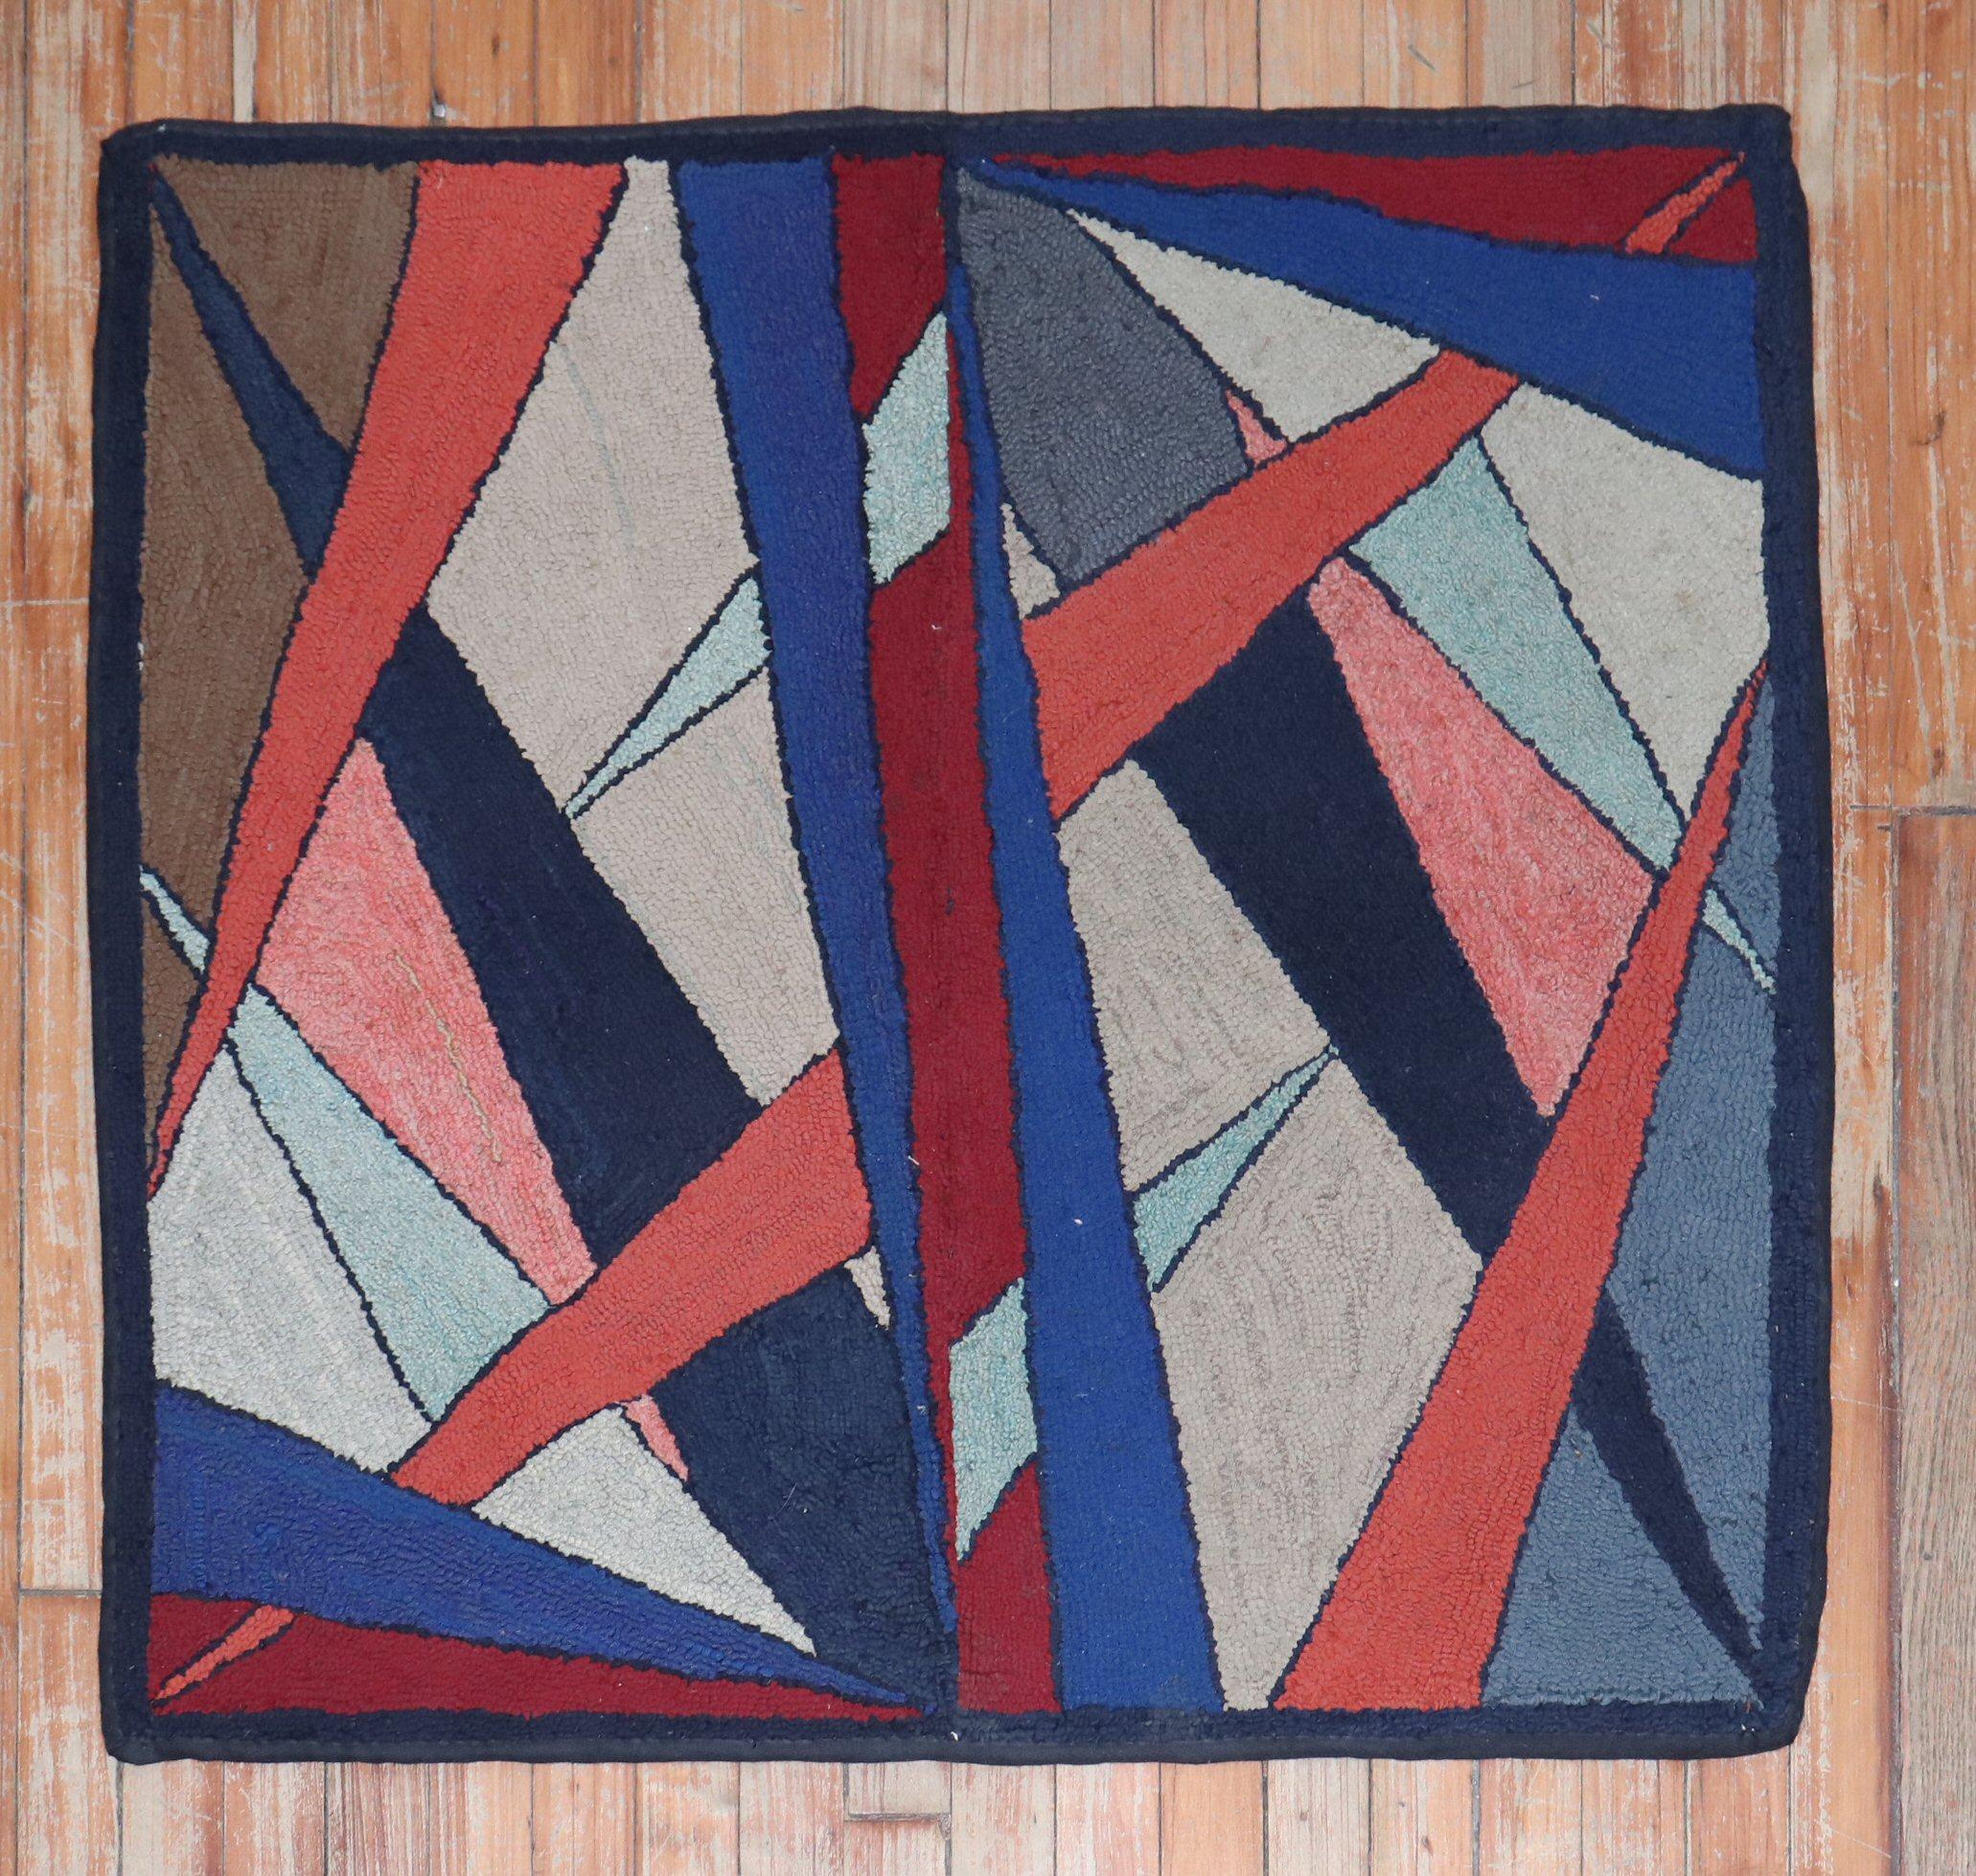 A compelling Mid-20th Century American hooked rug.

Measures: 2'11